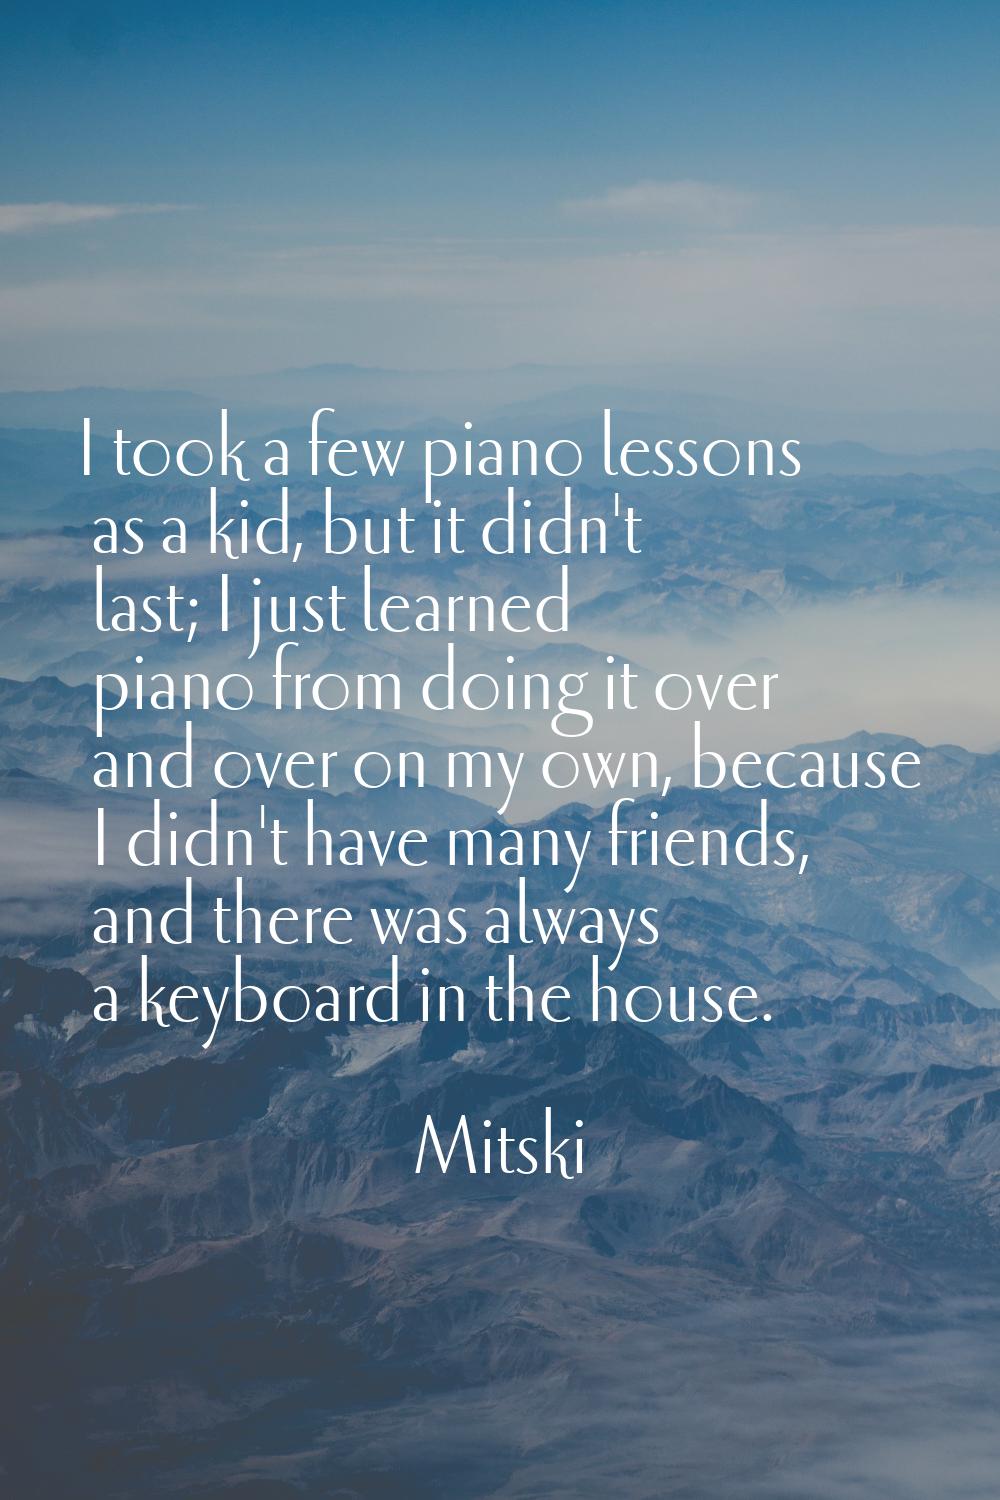 I took a few piano lessons as a kid, but it didn't last; I just learned piano from doing it over an